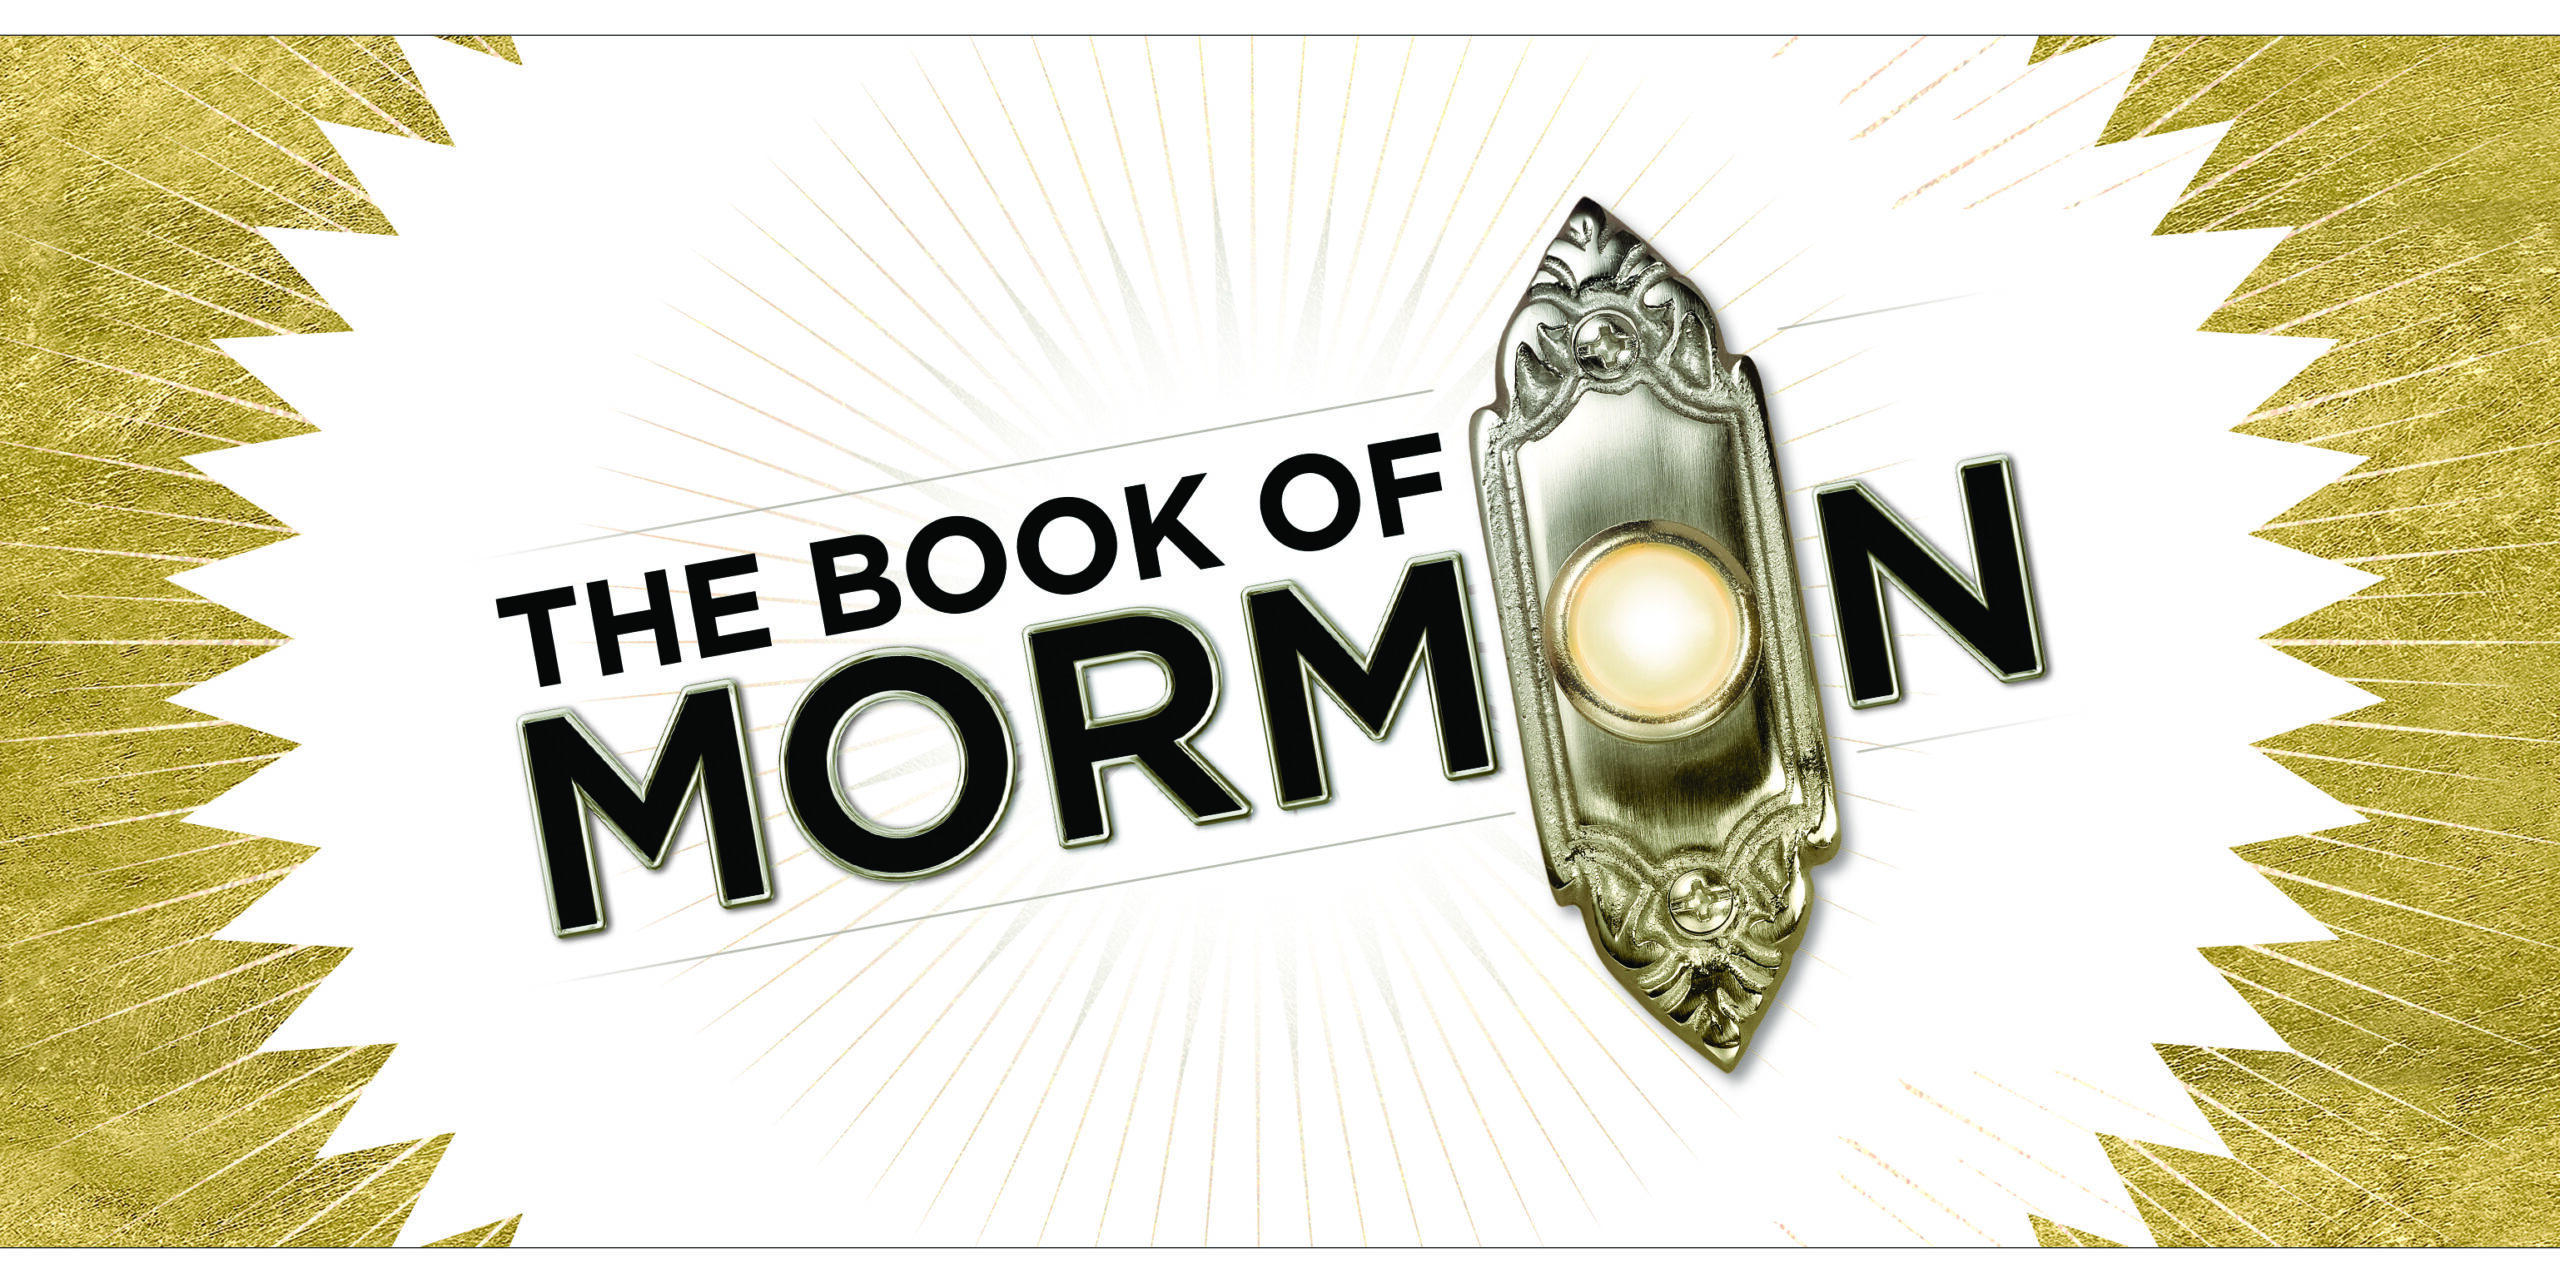 Graphic title art for the Broadway Musical "The Book of Mormon"